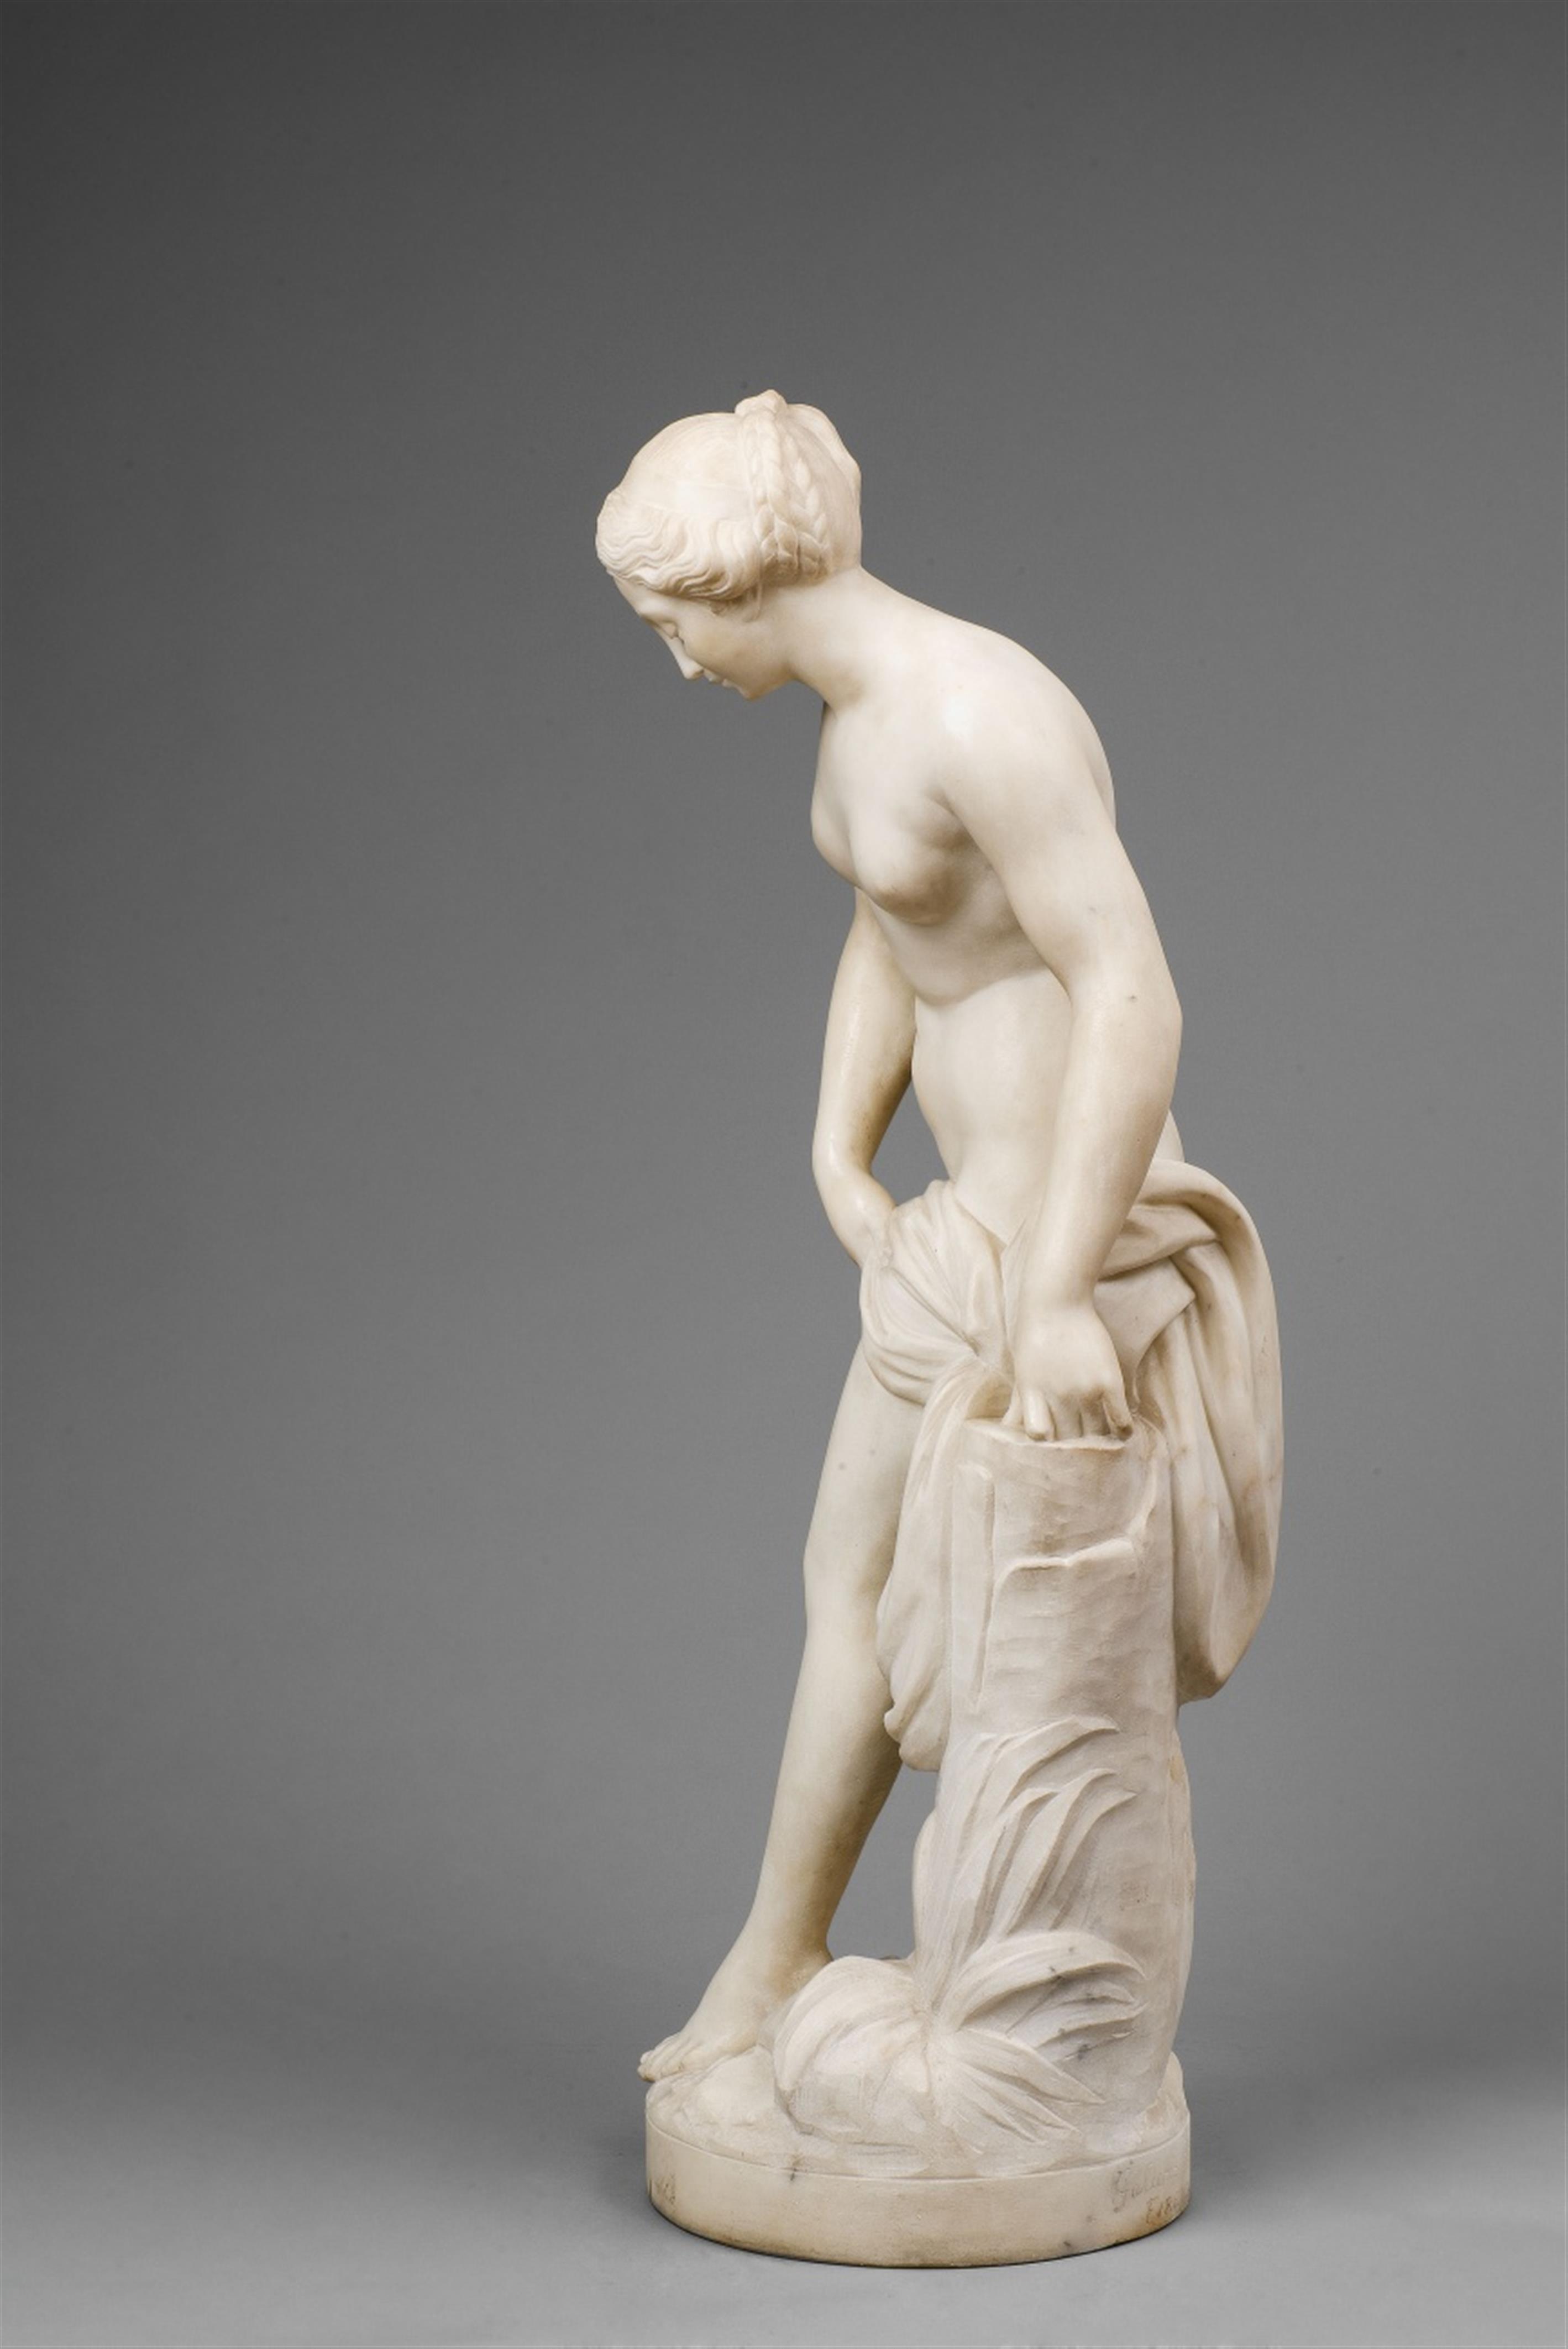 Baigneuse nach Etienne-Maurice Falconet - image-3